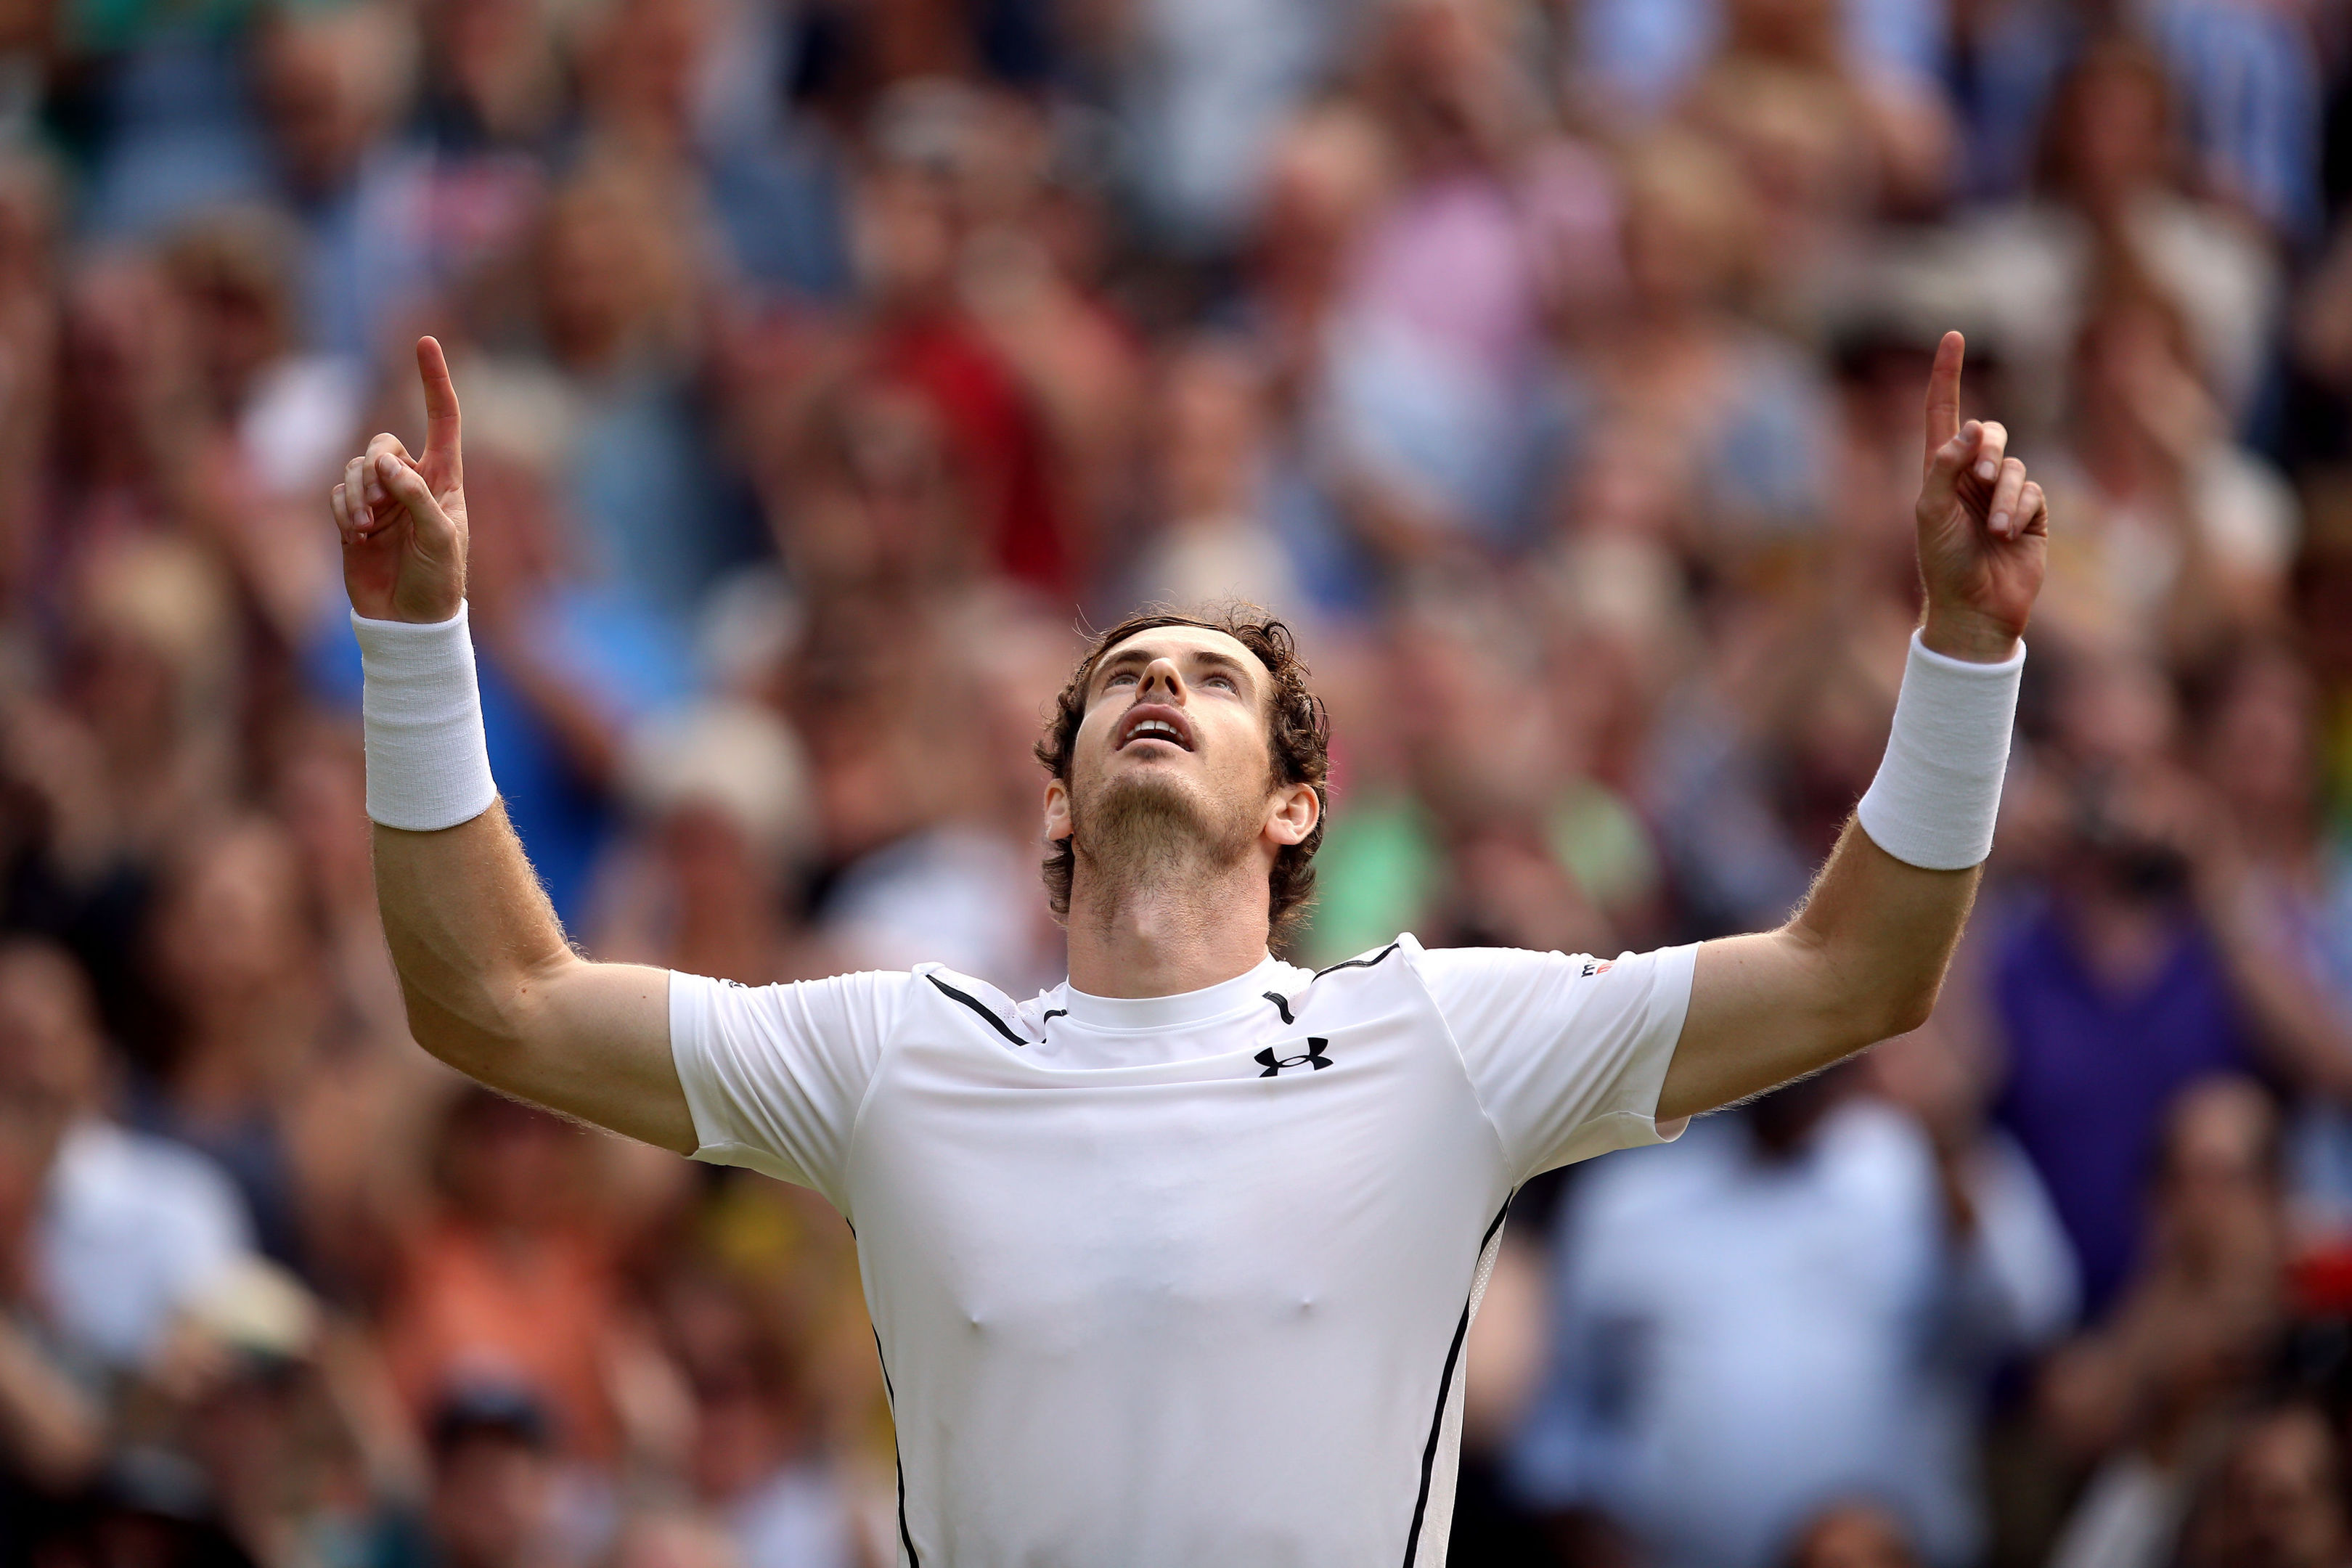 Andy Murray celebrates after clinching victory over Tomas Berdych.